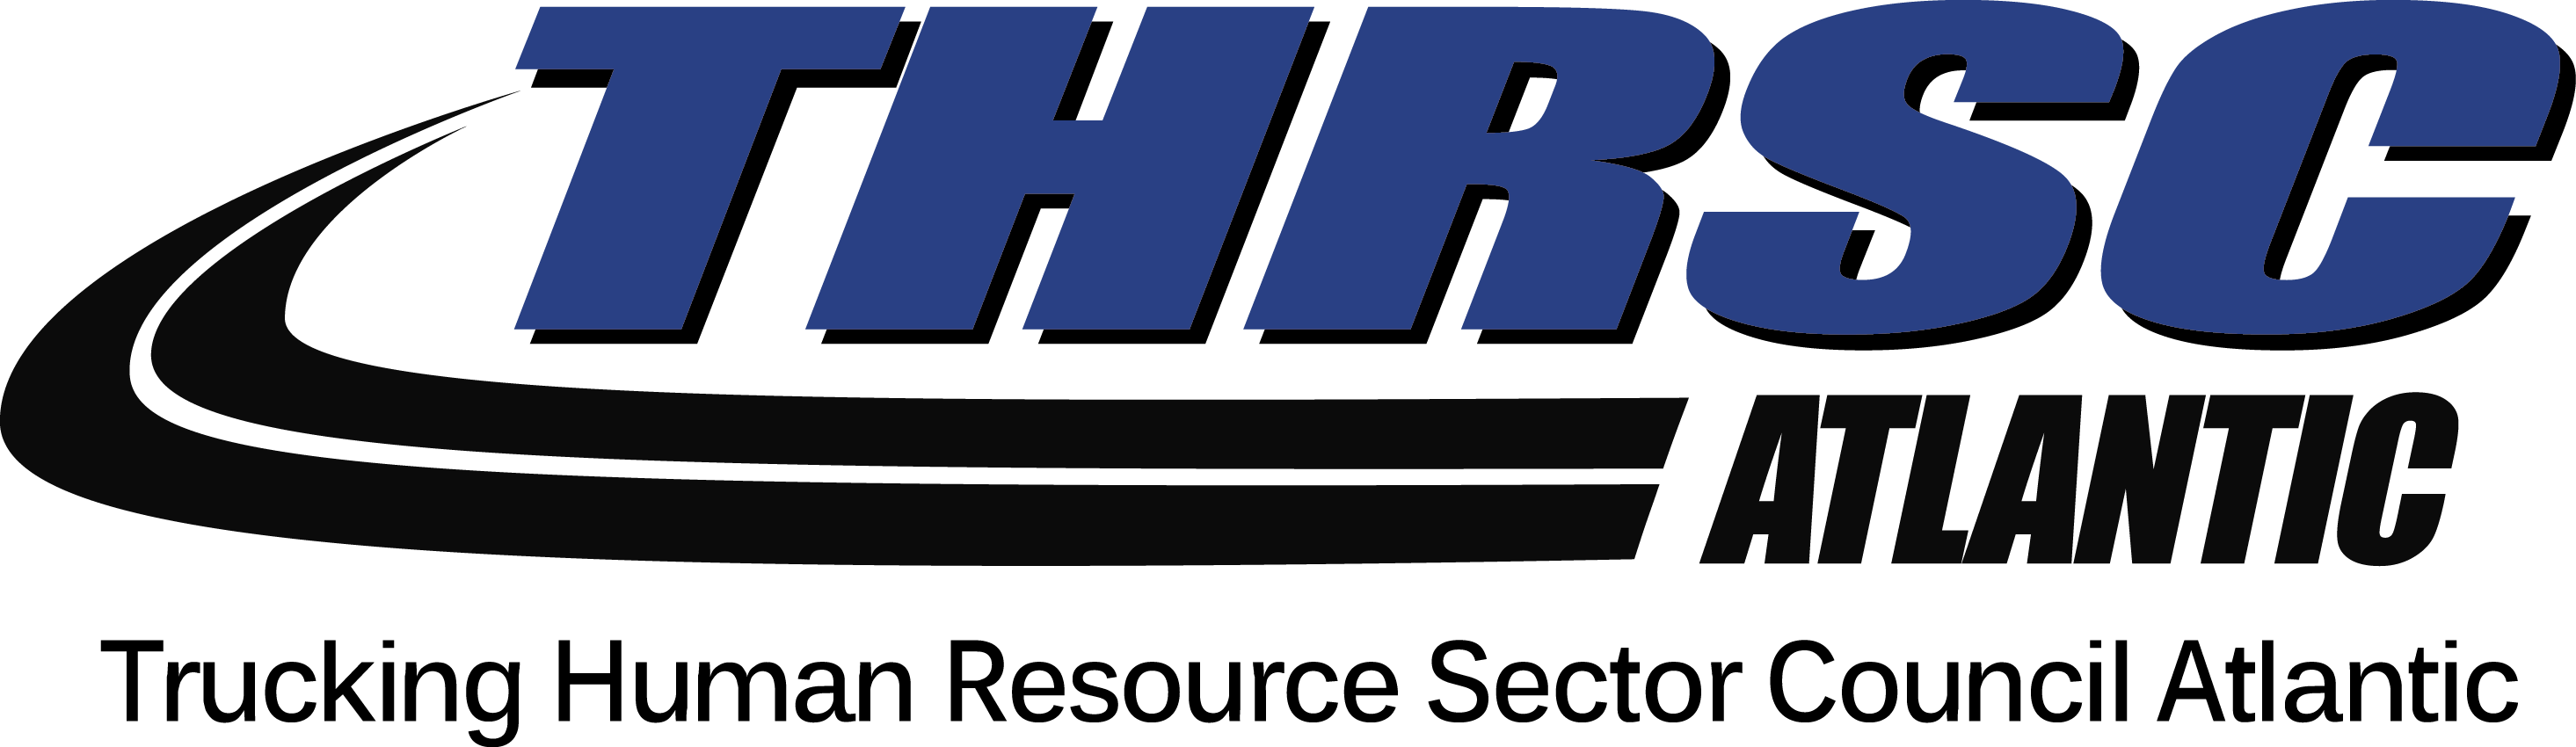 Logo Image for Trucking Human Resource Sector Council